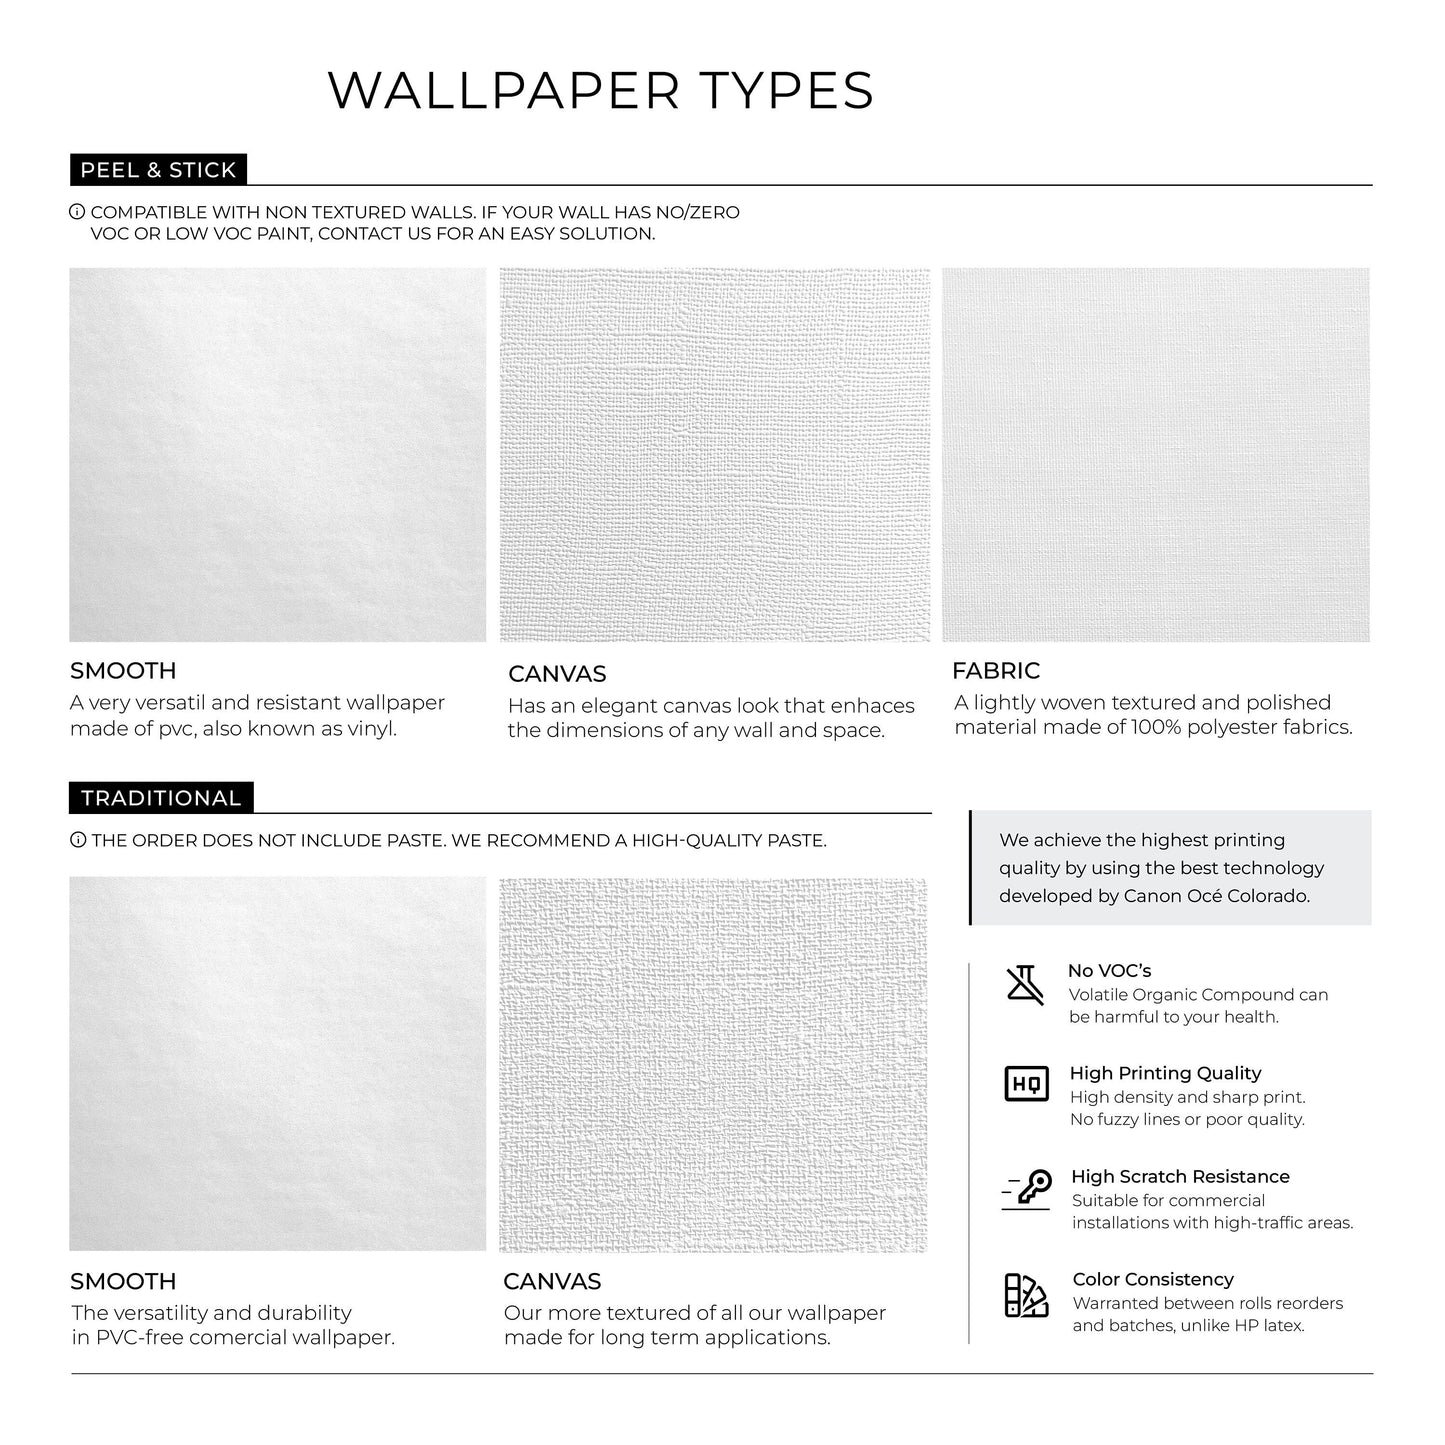 Wallpaper Peel and Stick Wallpaper Removable Wallpaper Home Decor Wall Art Wall Decor Room Decor / Black and White Wallpaper - B976